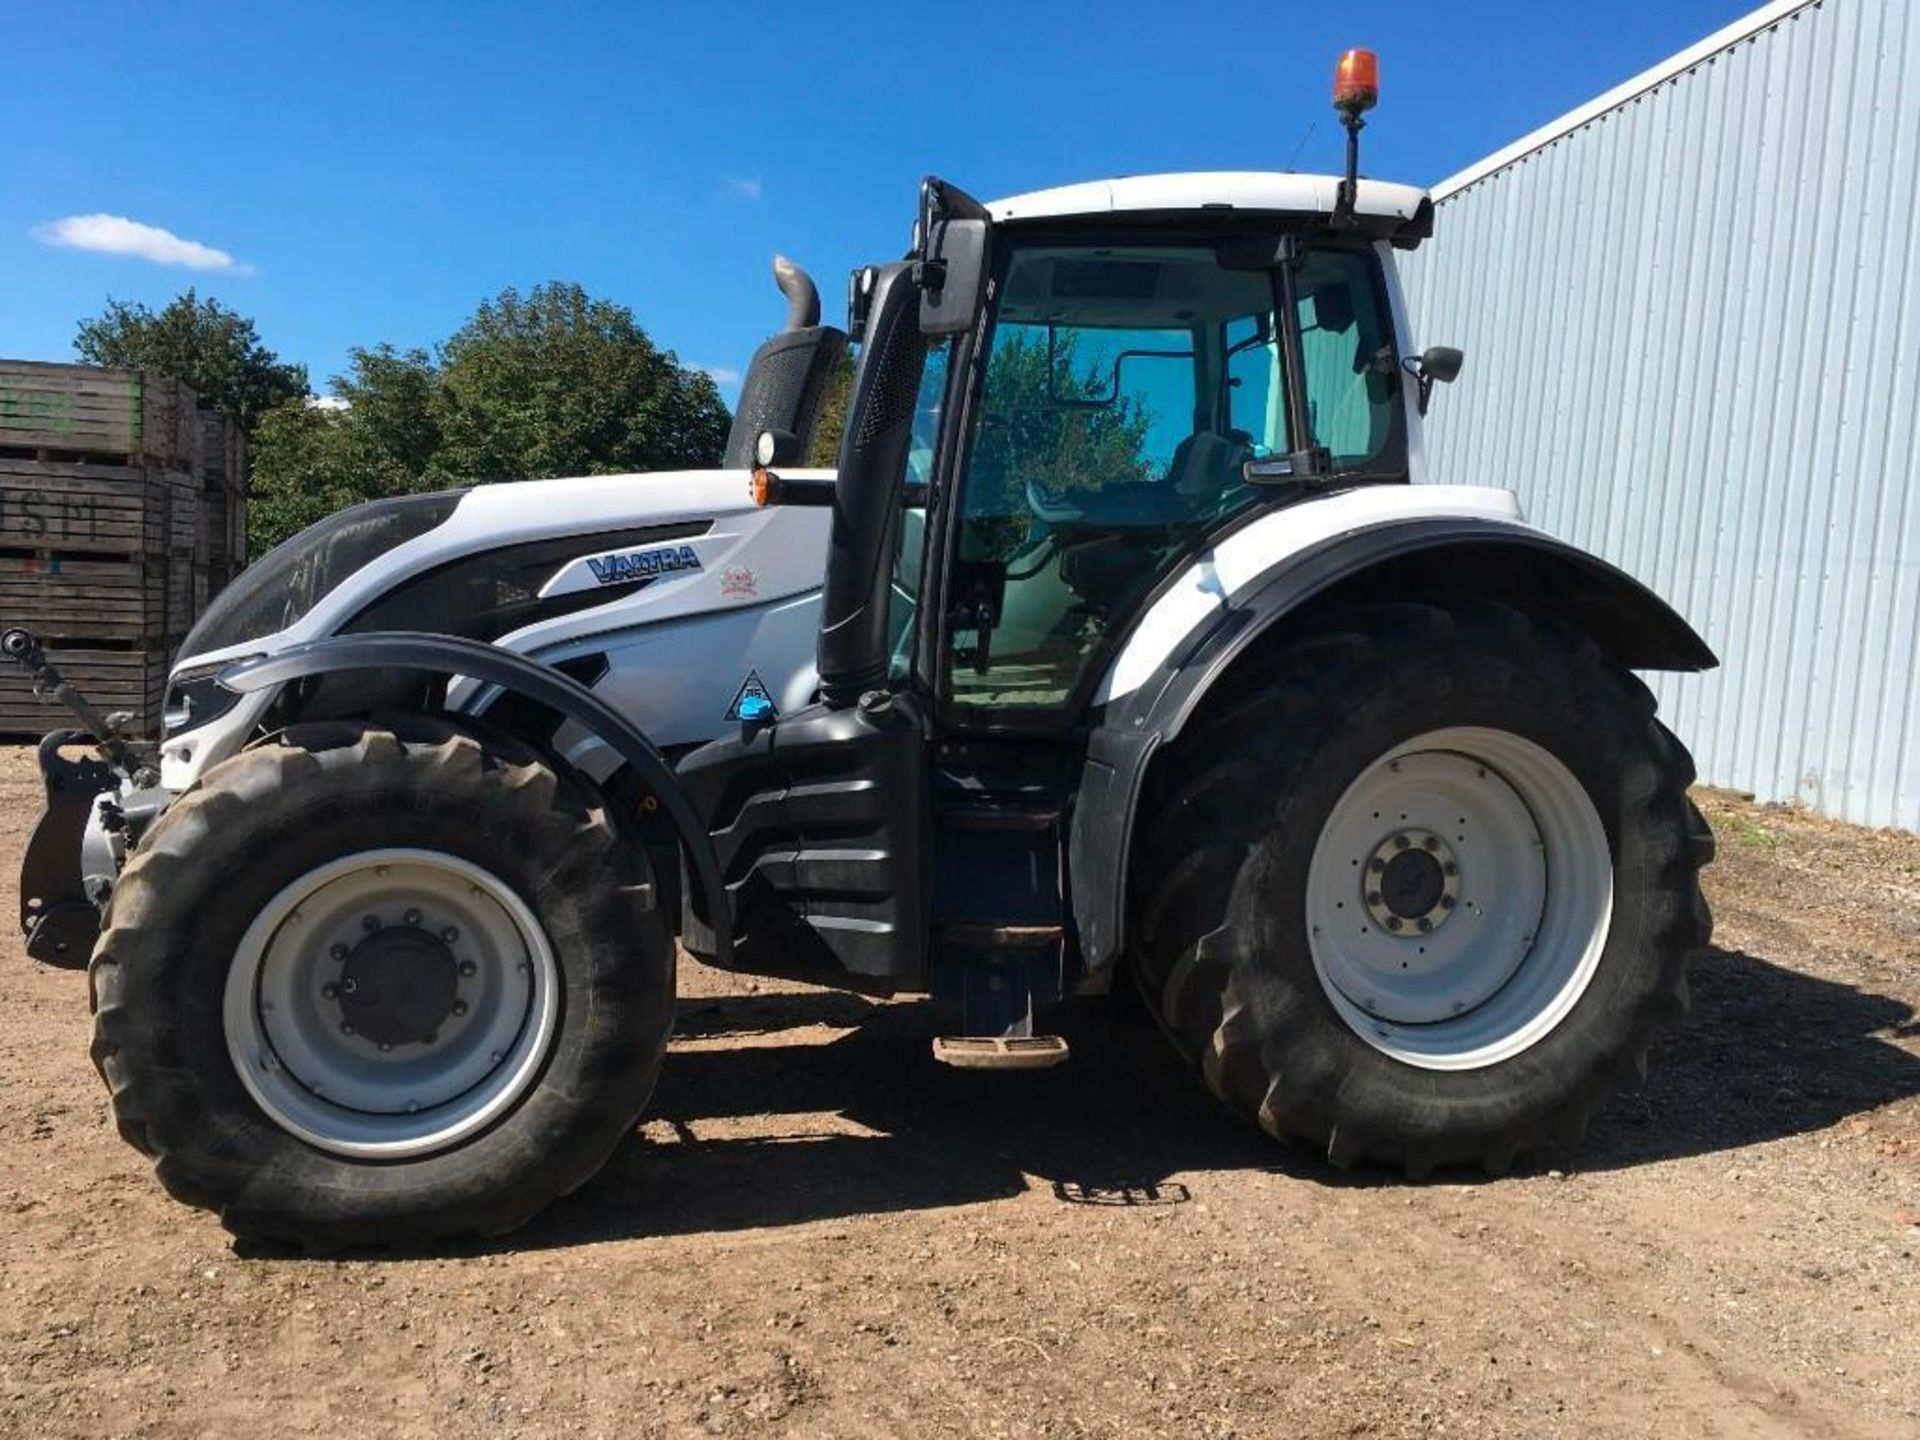 2015 Valtra T174 Versu 50kph tractor, powershift transmission, air suspension, 2 front and 4 rear sp - Image 6 of 15